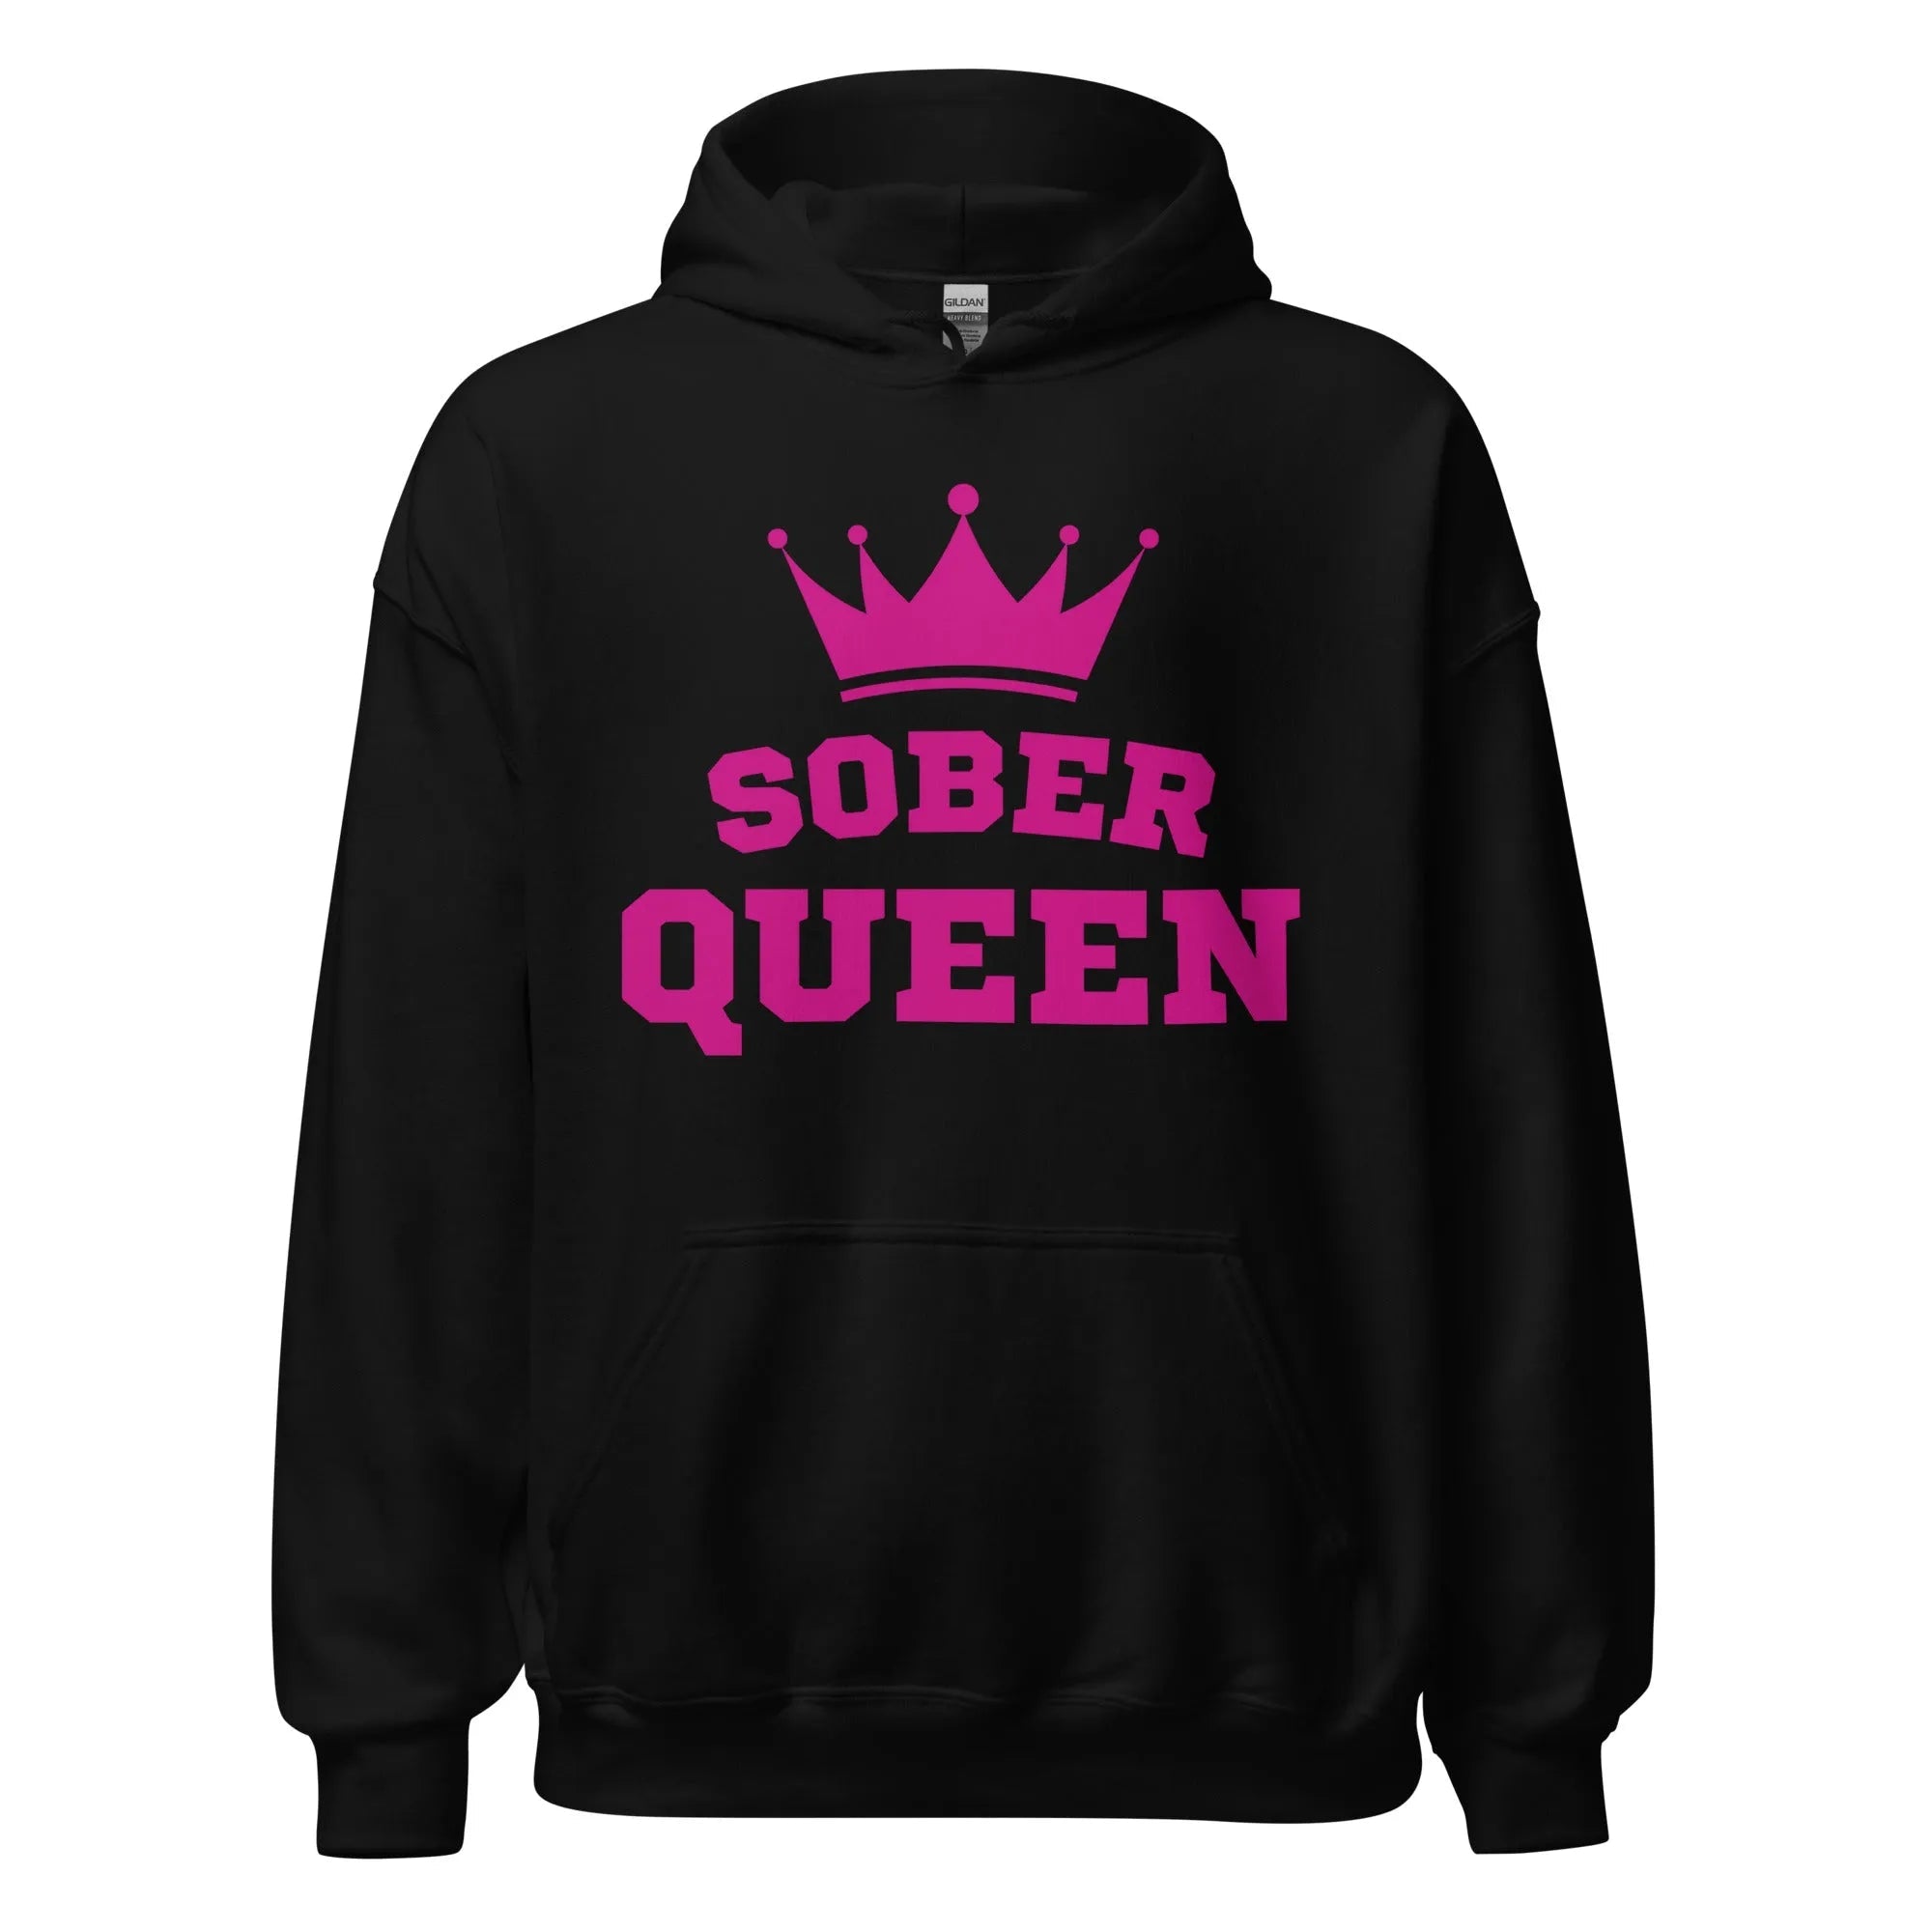 Sober Queen Hoodie: Embrace Your Sobriety and Rule Your Realm - Sobervation